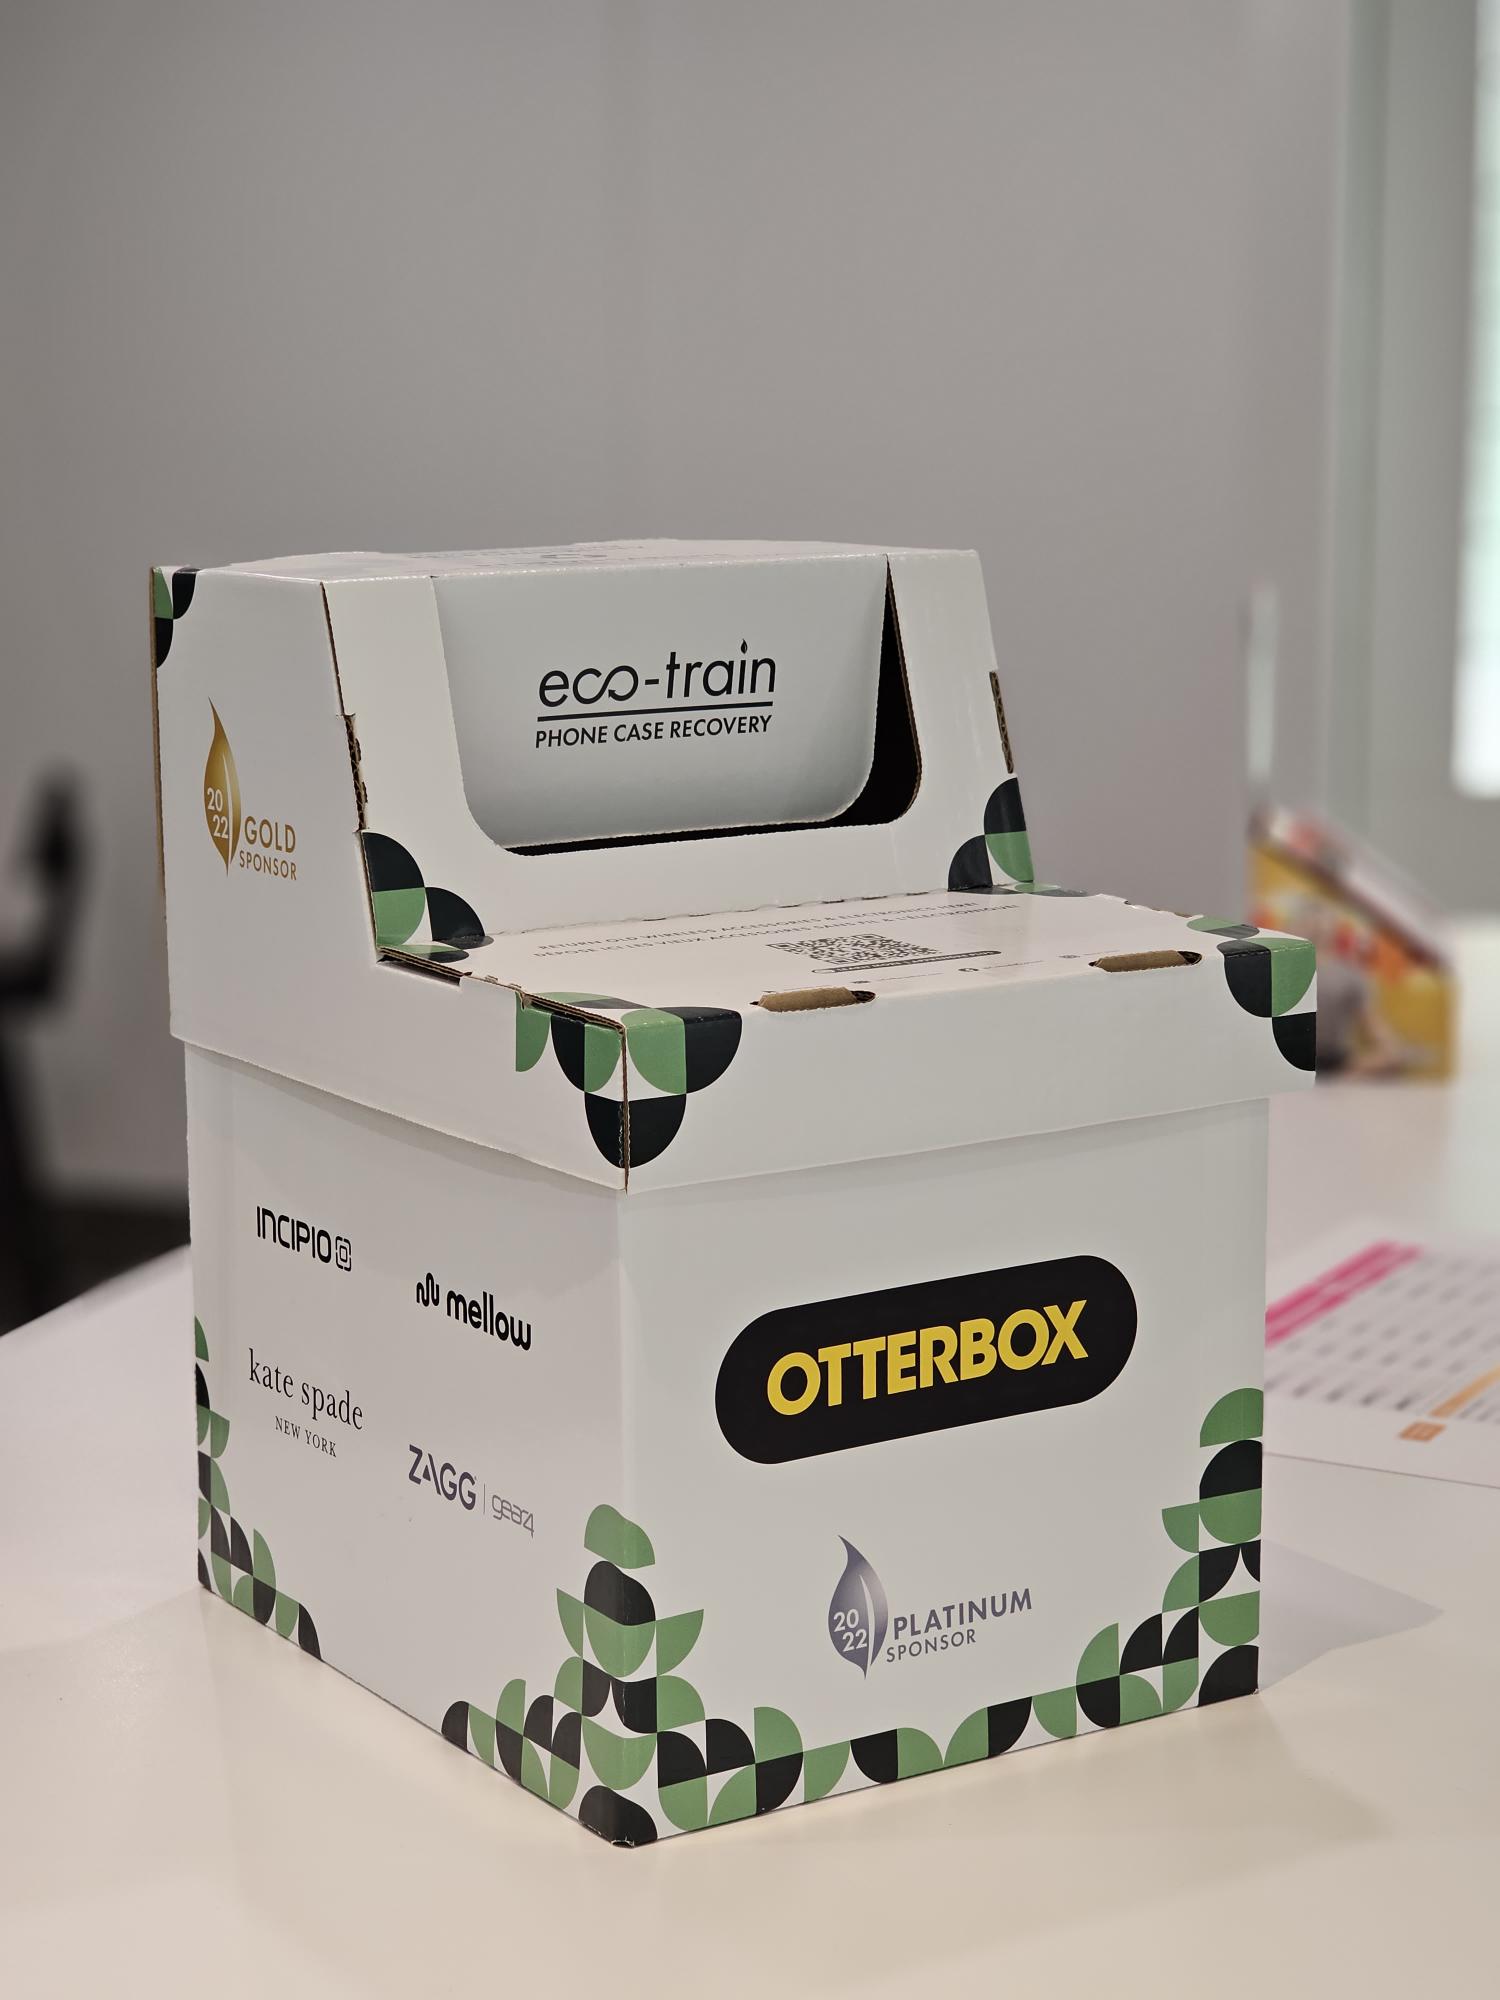 Eco-train phone case recovery box on a counter with sponsor logos including OtterBox, Incipio, kate spade new york, and ZAGG